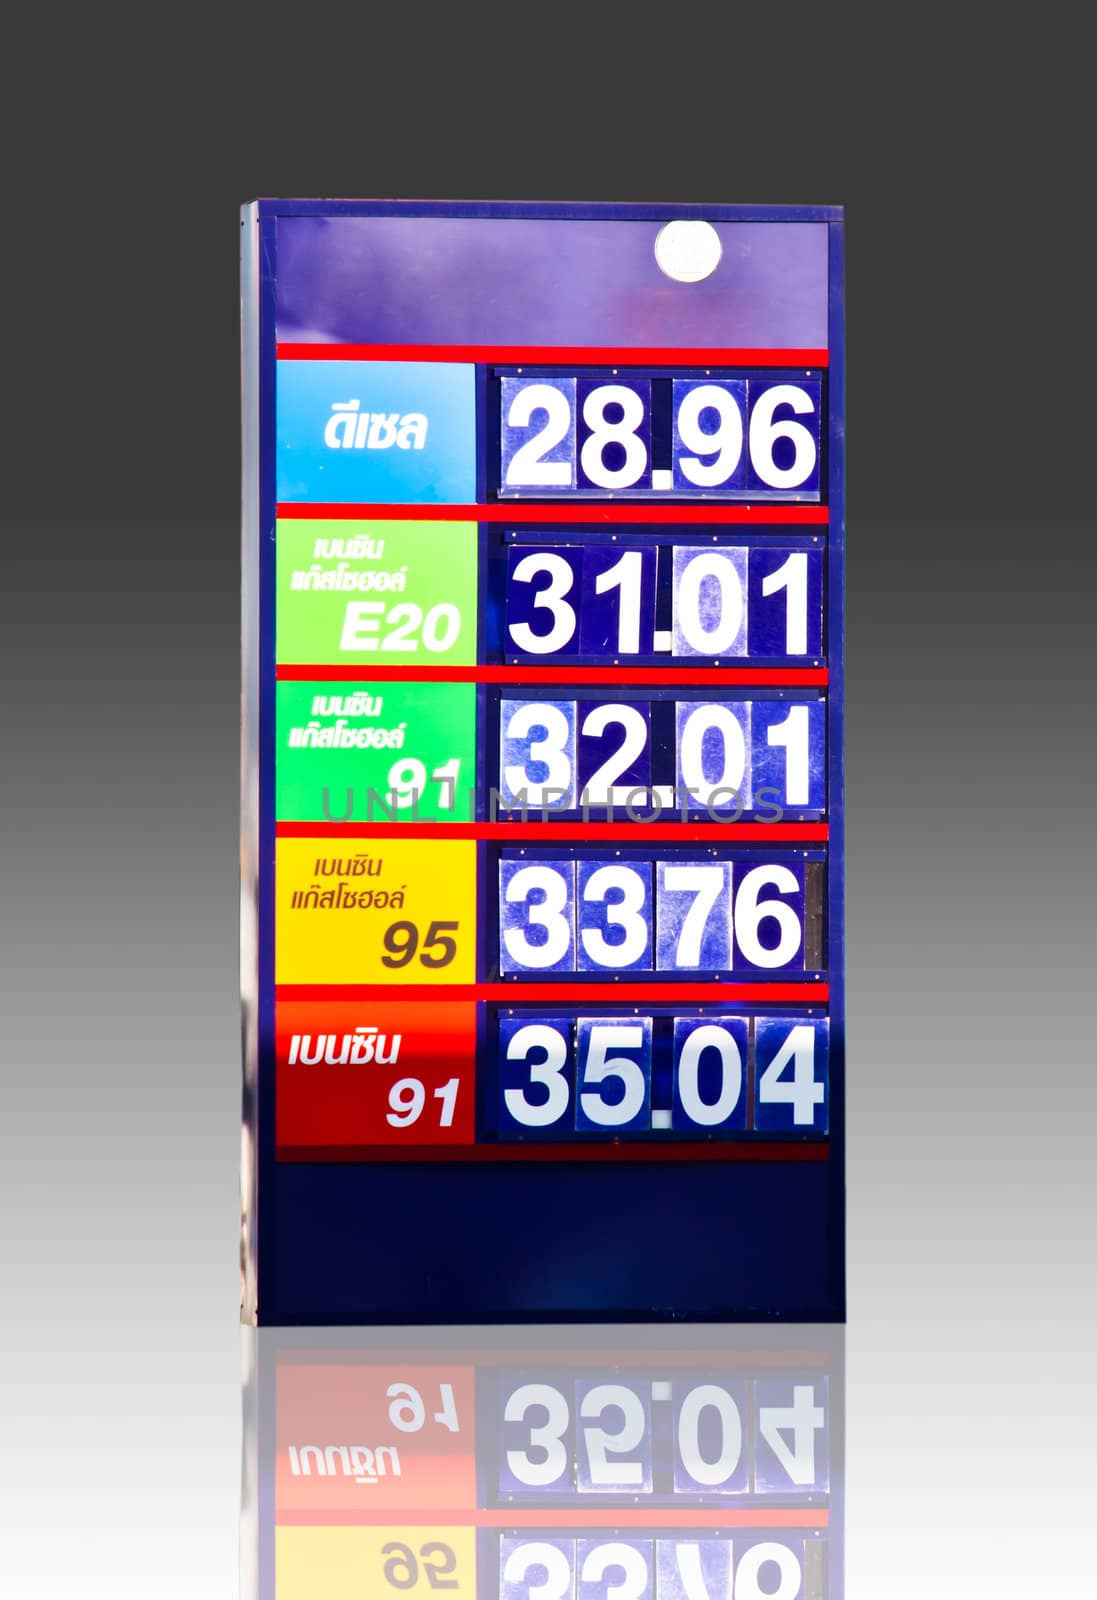 The fuel price signs. Used as the background.